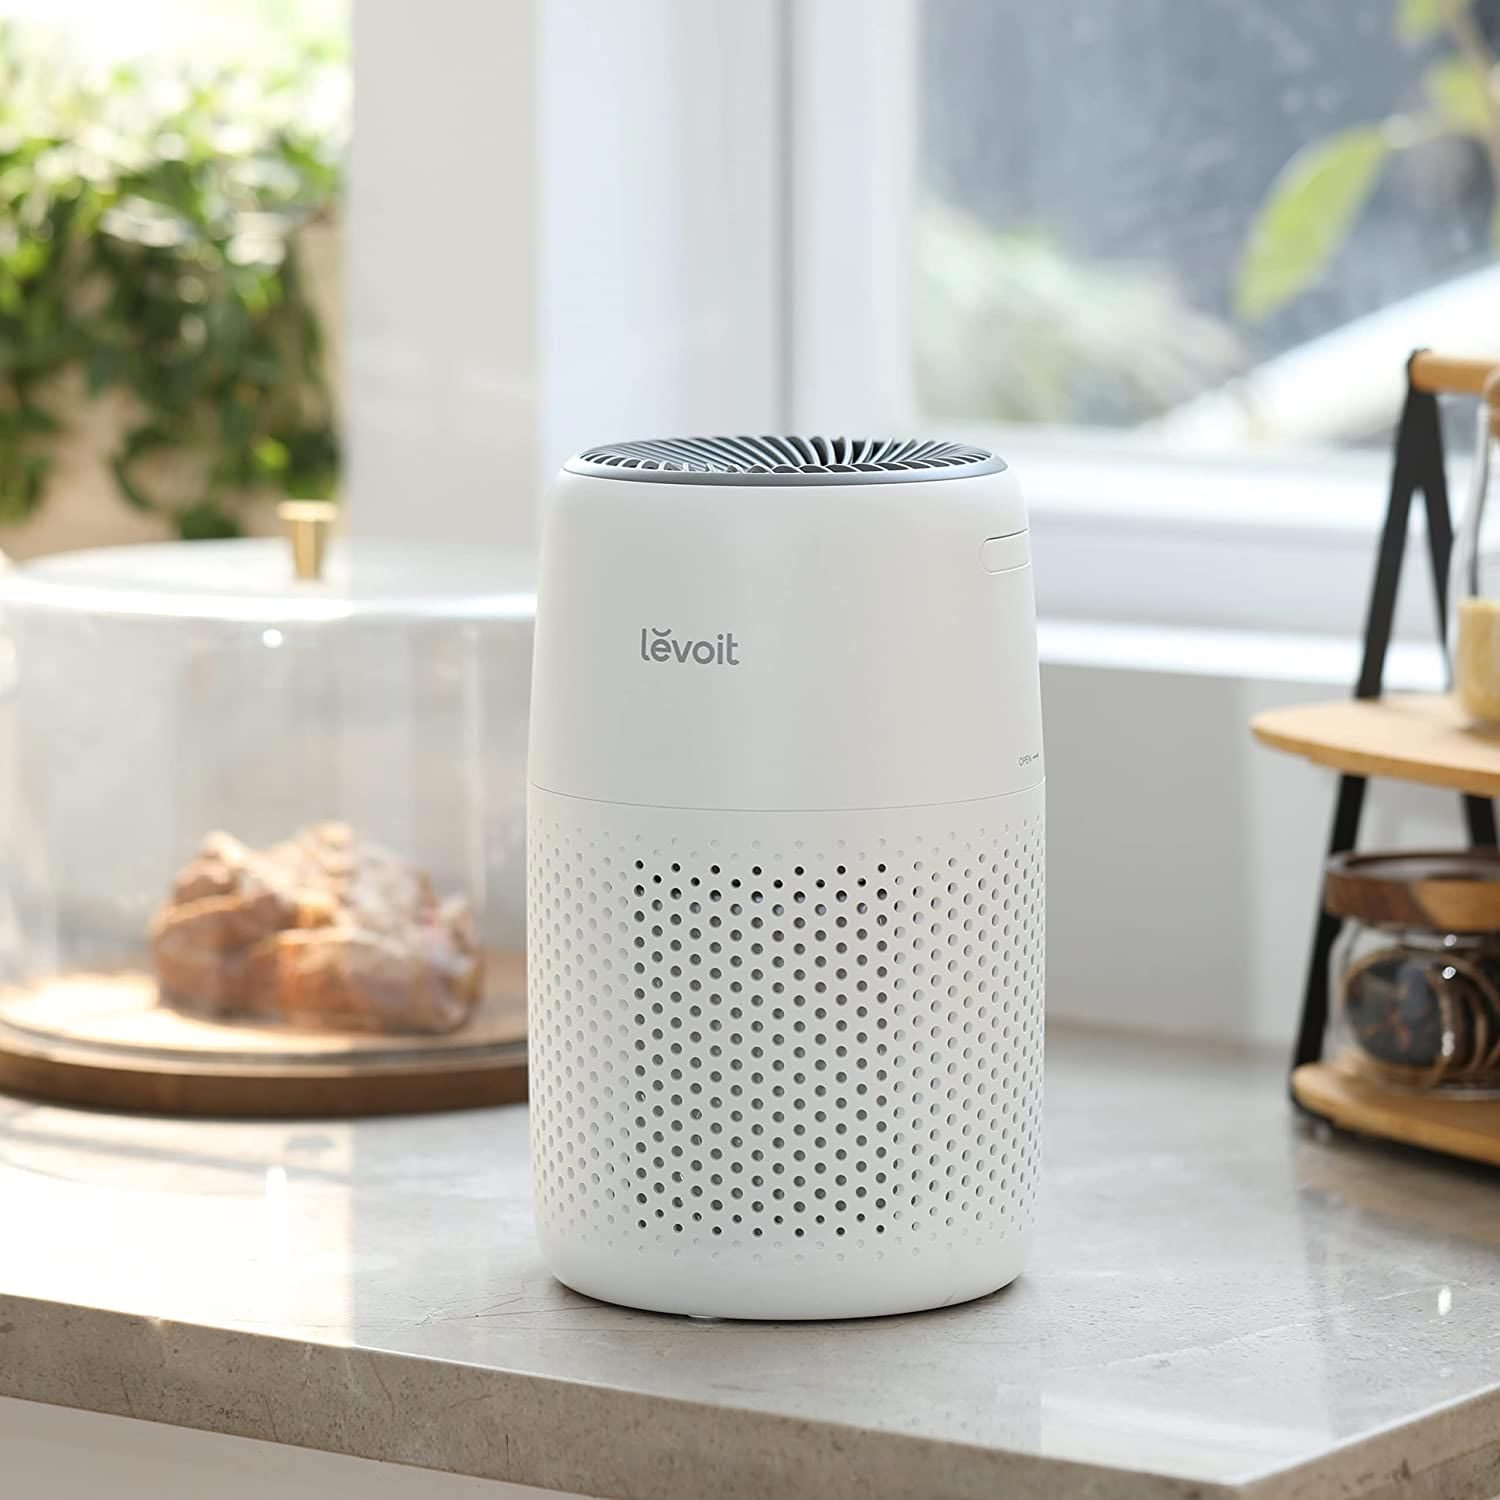 The 10 Best Air Purifiers for a Basement to Remove Dust, Allergens and Odors